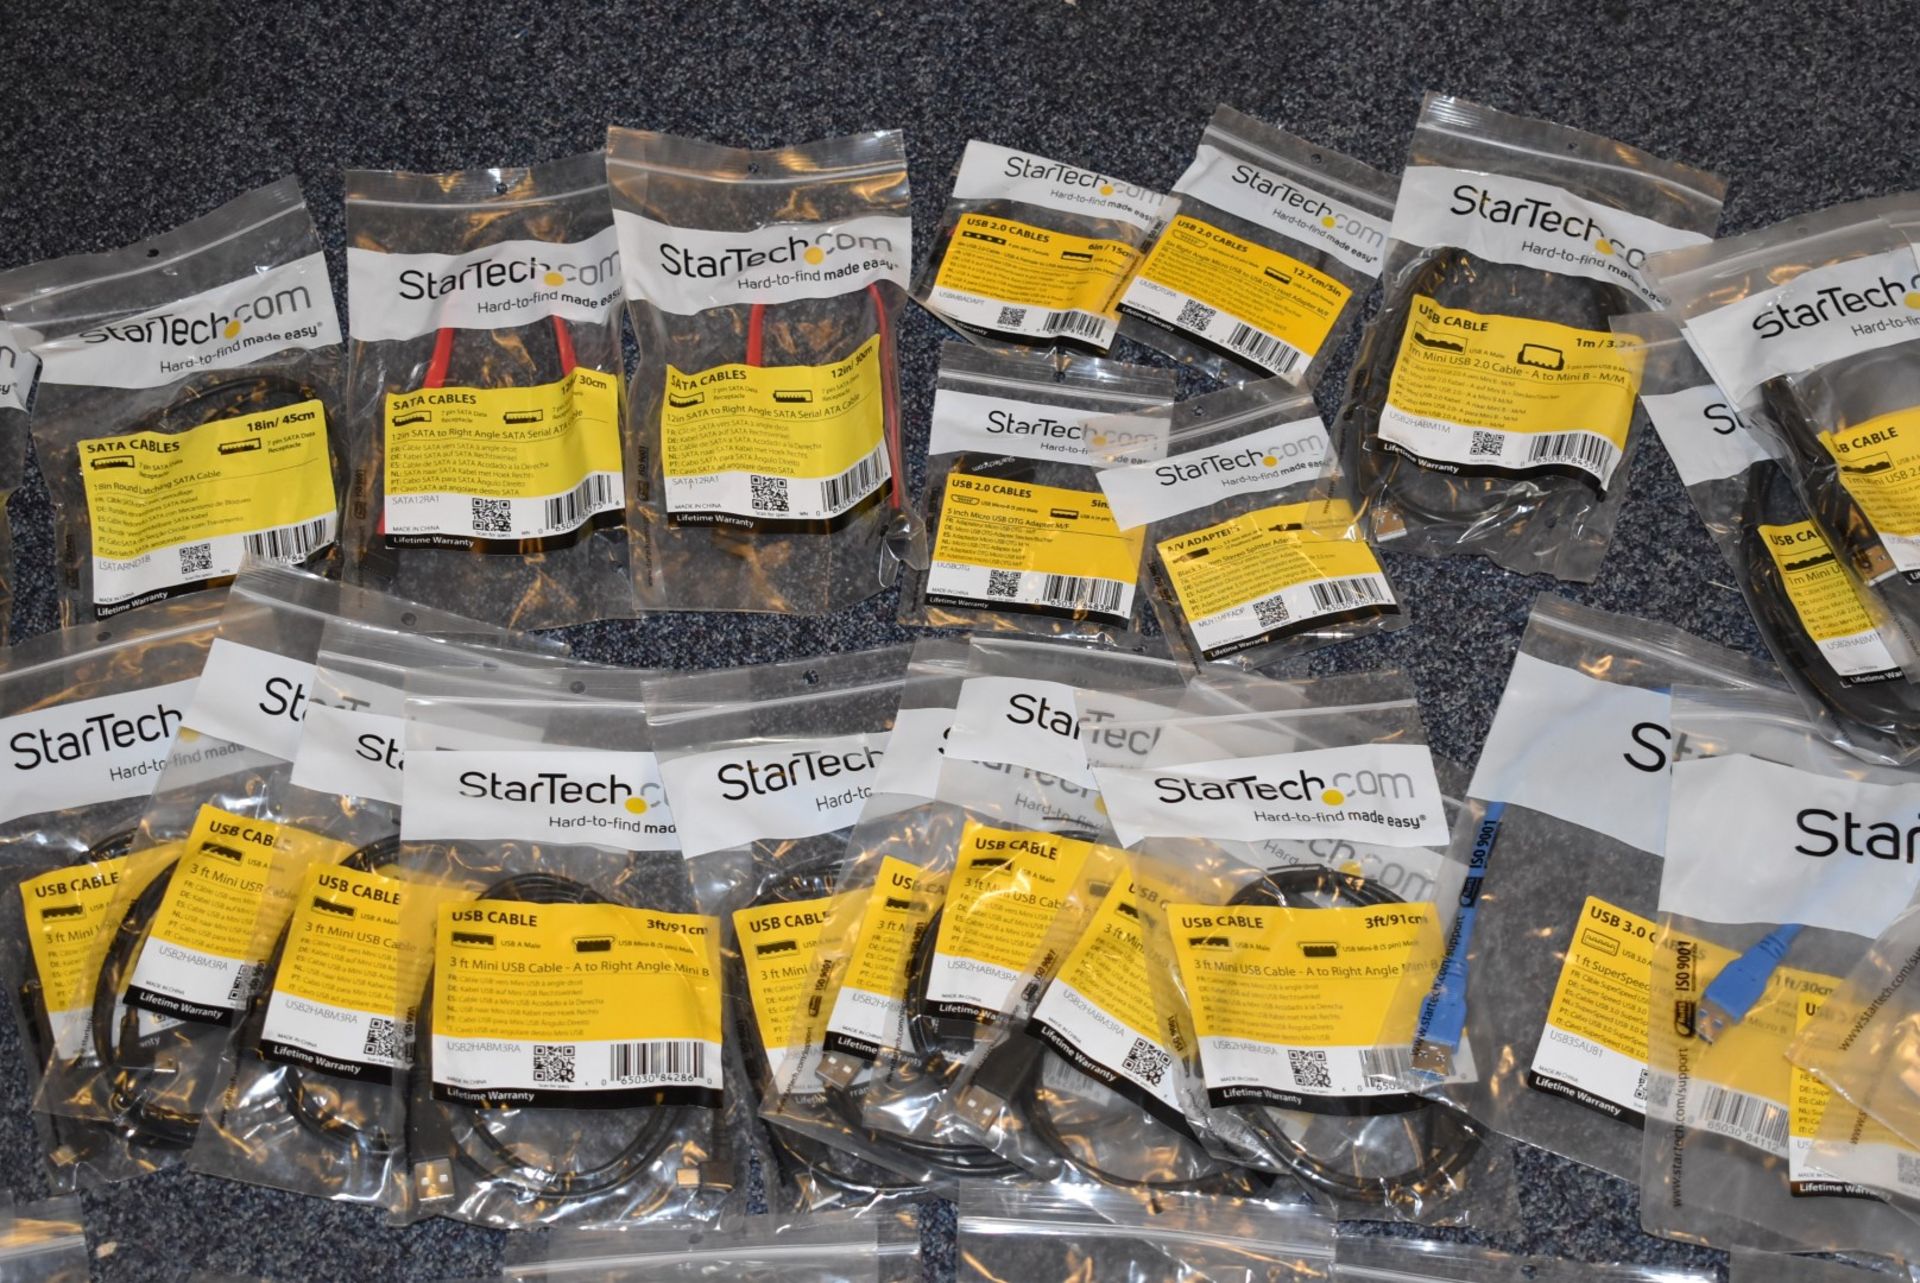 177 x Assorted StarTech Cables - Huge Lot in Original Packing - Various Cables Included - Image 37 of 50